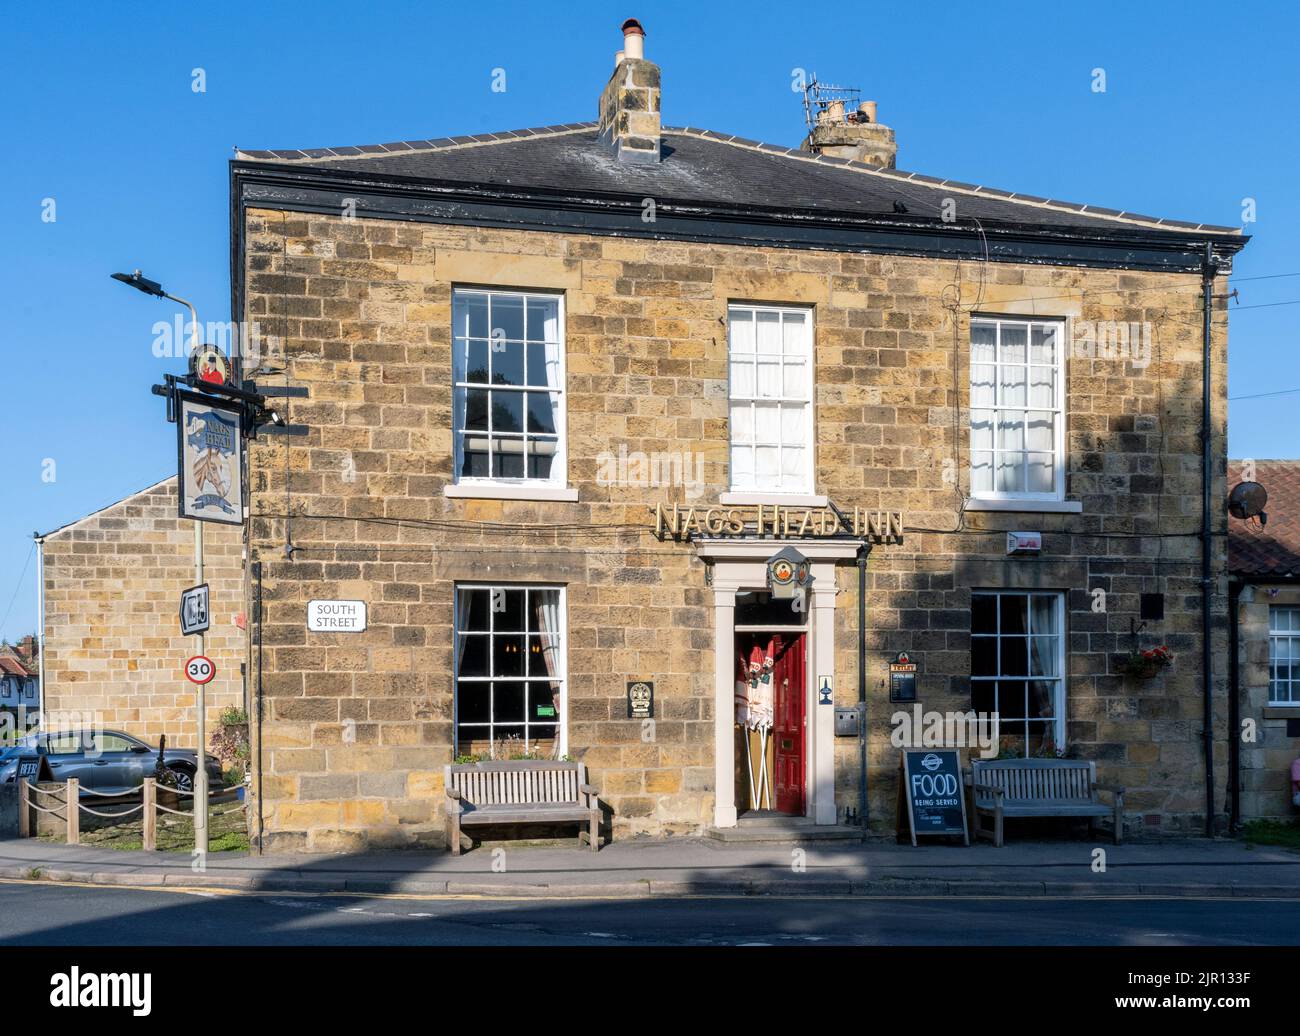 The Nags Head Inn - (public house) - 35 High Street, Scalby, Scarborough, North Yorkshire, England, UK Stock Photo